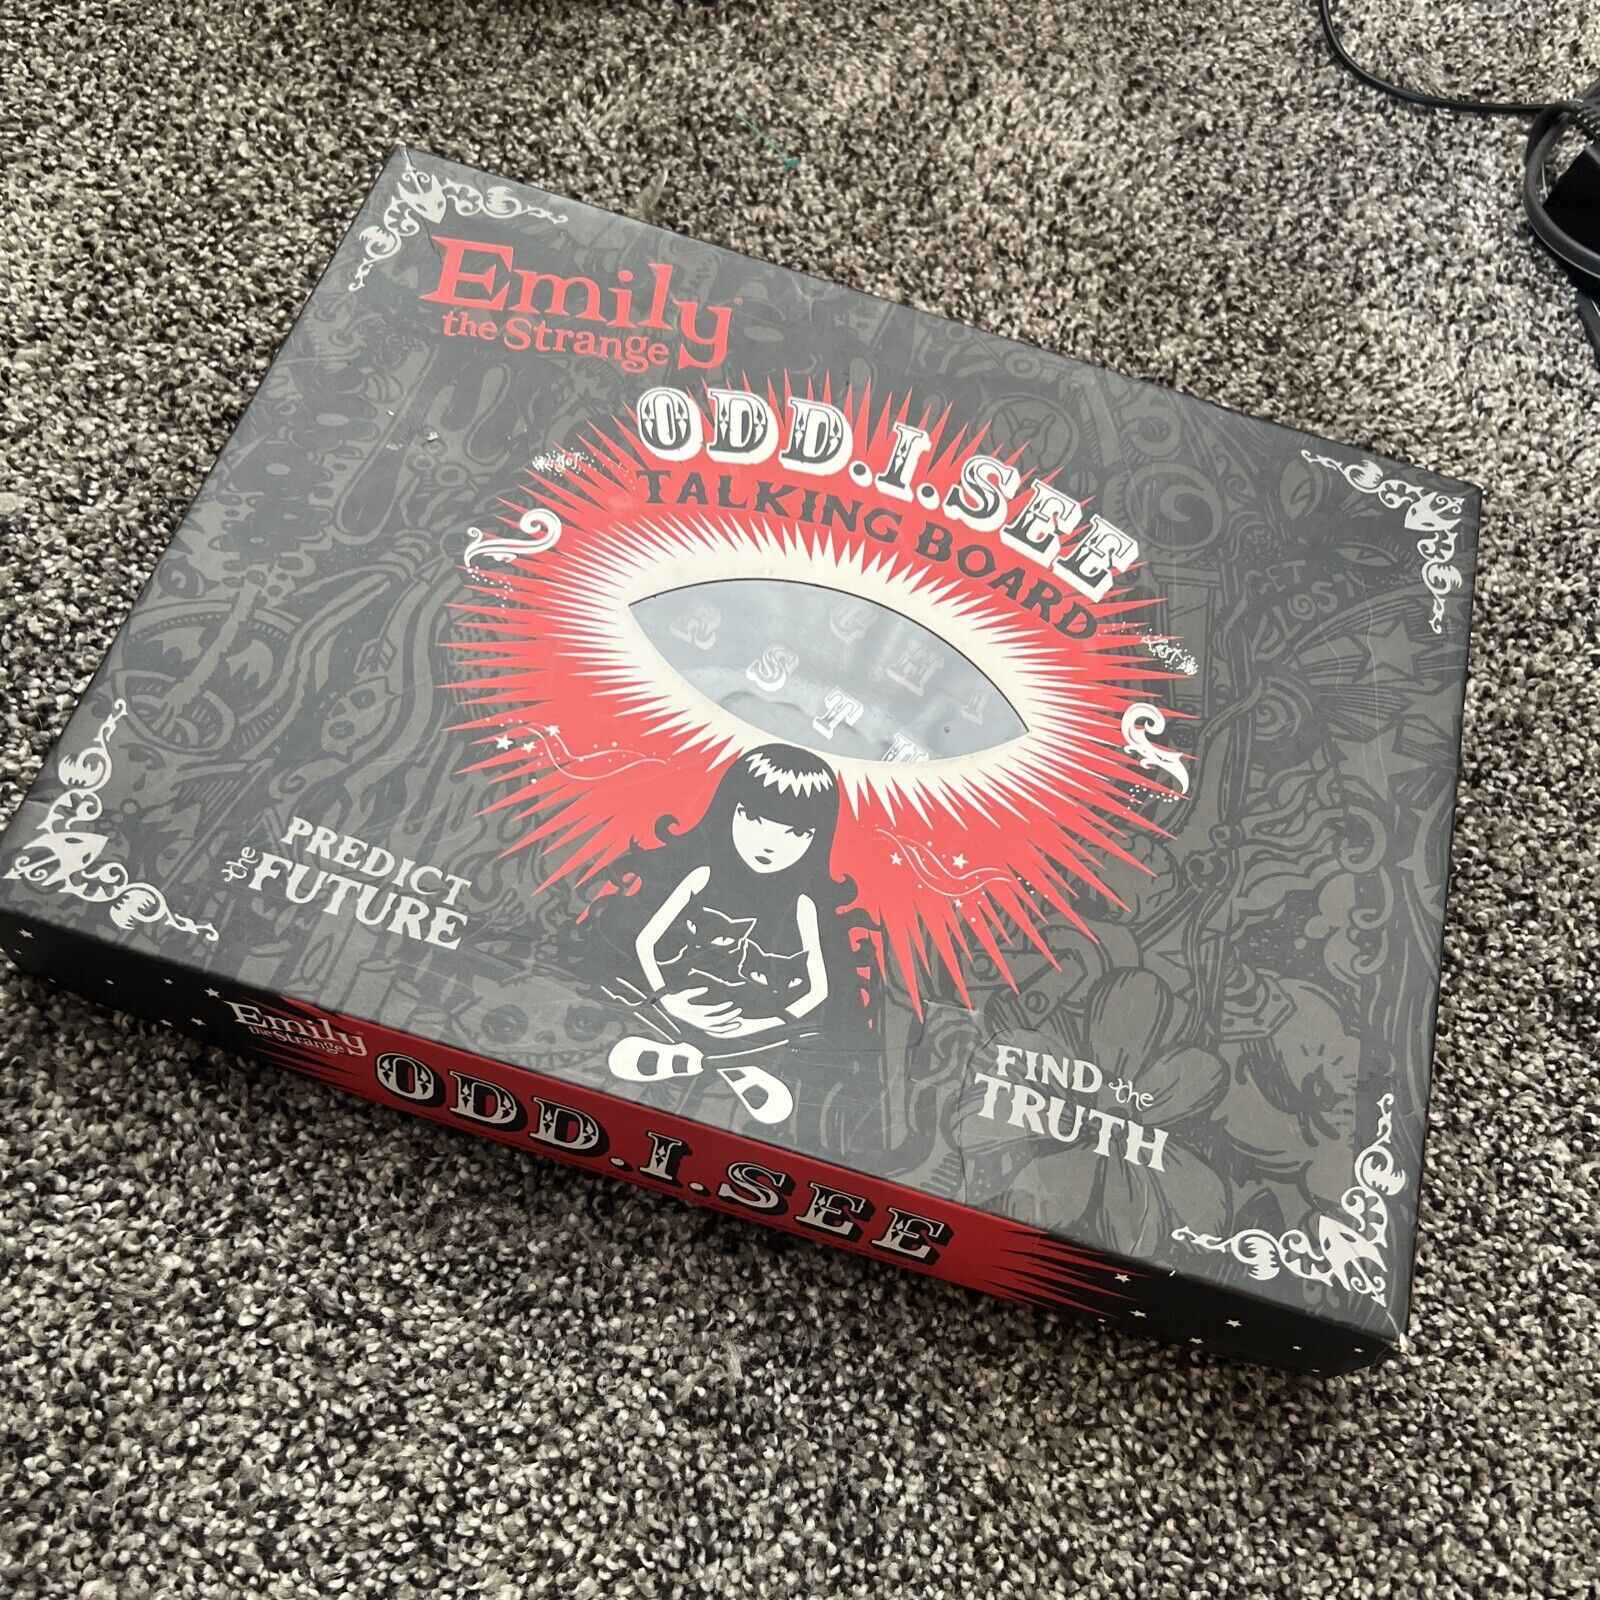 Emily the Strange ODD I SEE Ouija Board Does Not Come With Novel